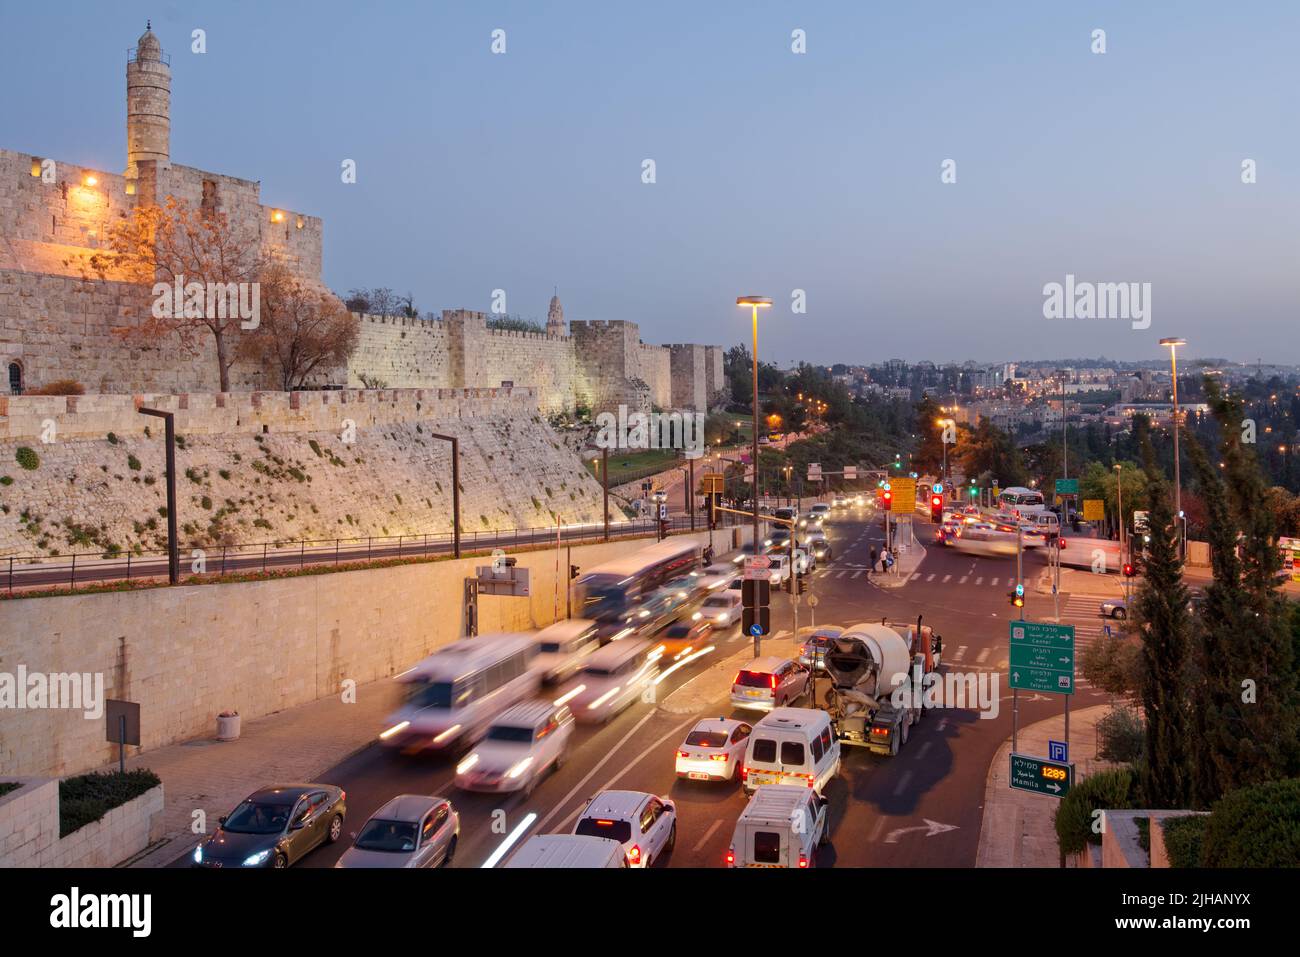 Jerusalem, Israel - March 20, 2014: Car traffic under the walls of the Old City in the night Stock Photo